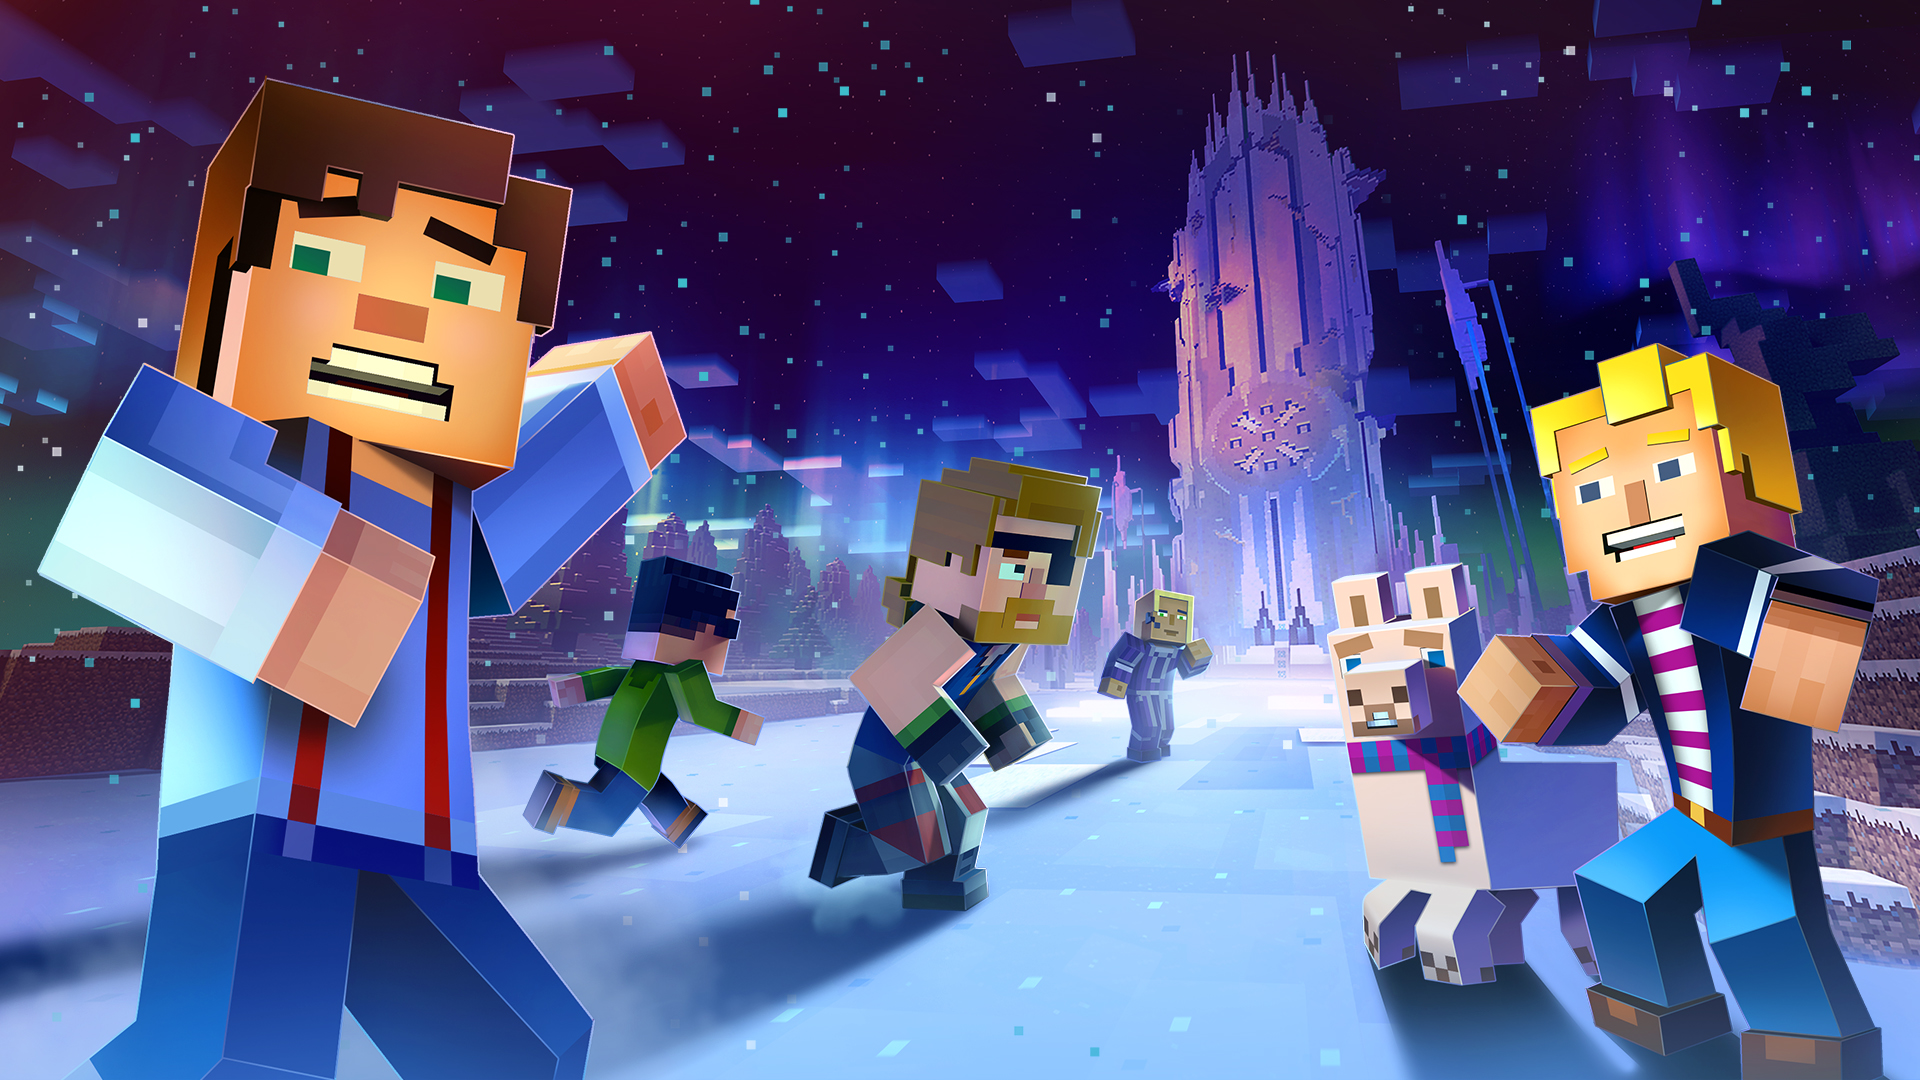 The Next Episode of Minecraft Story Mode Season 2 Releases 